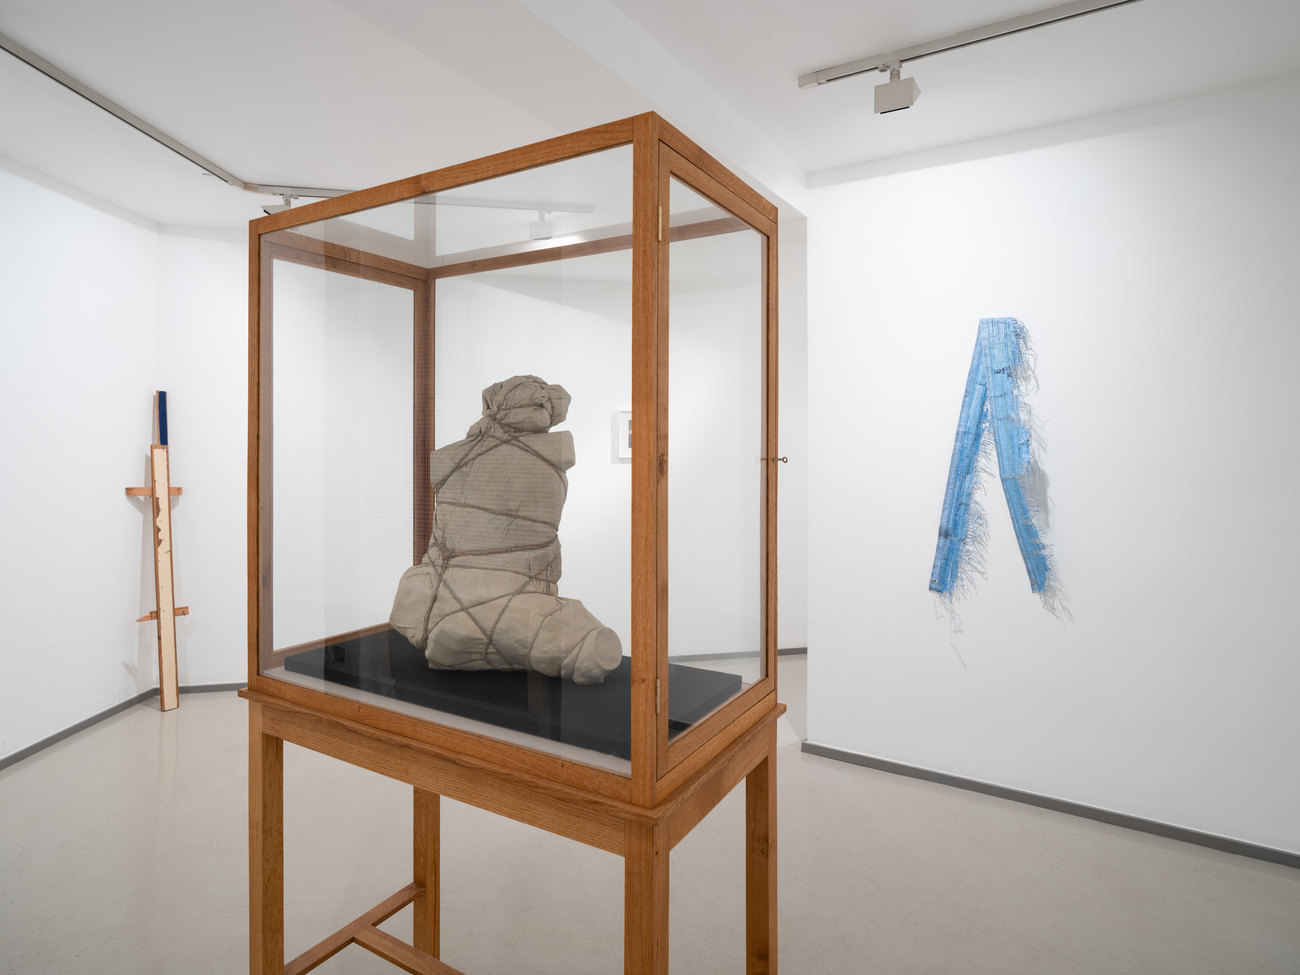 Installation photo shows Gavin's work centred, looks like a wrapped disformed figure